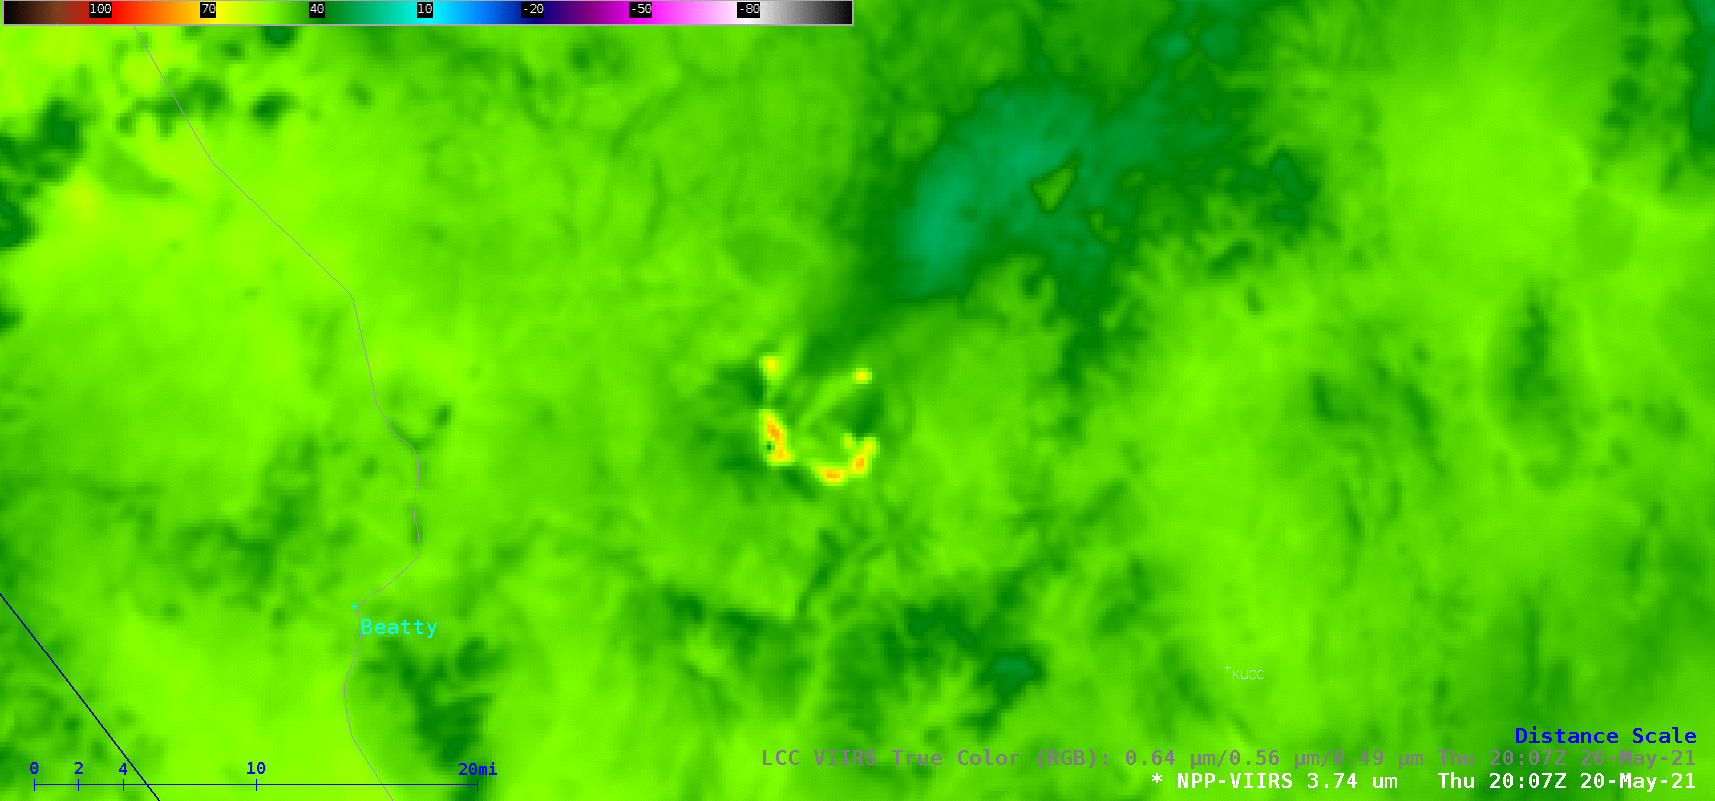 NOAA-20 VIIRS Shortwave Infrared (3.74 µm) and True Color RGB images at 2014 UTC [click to enlarge]